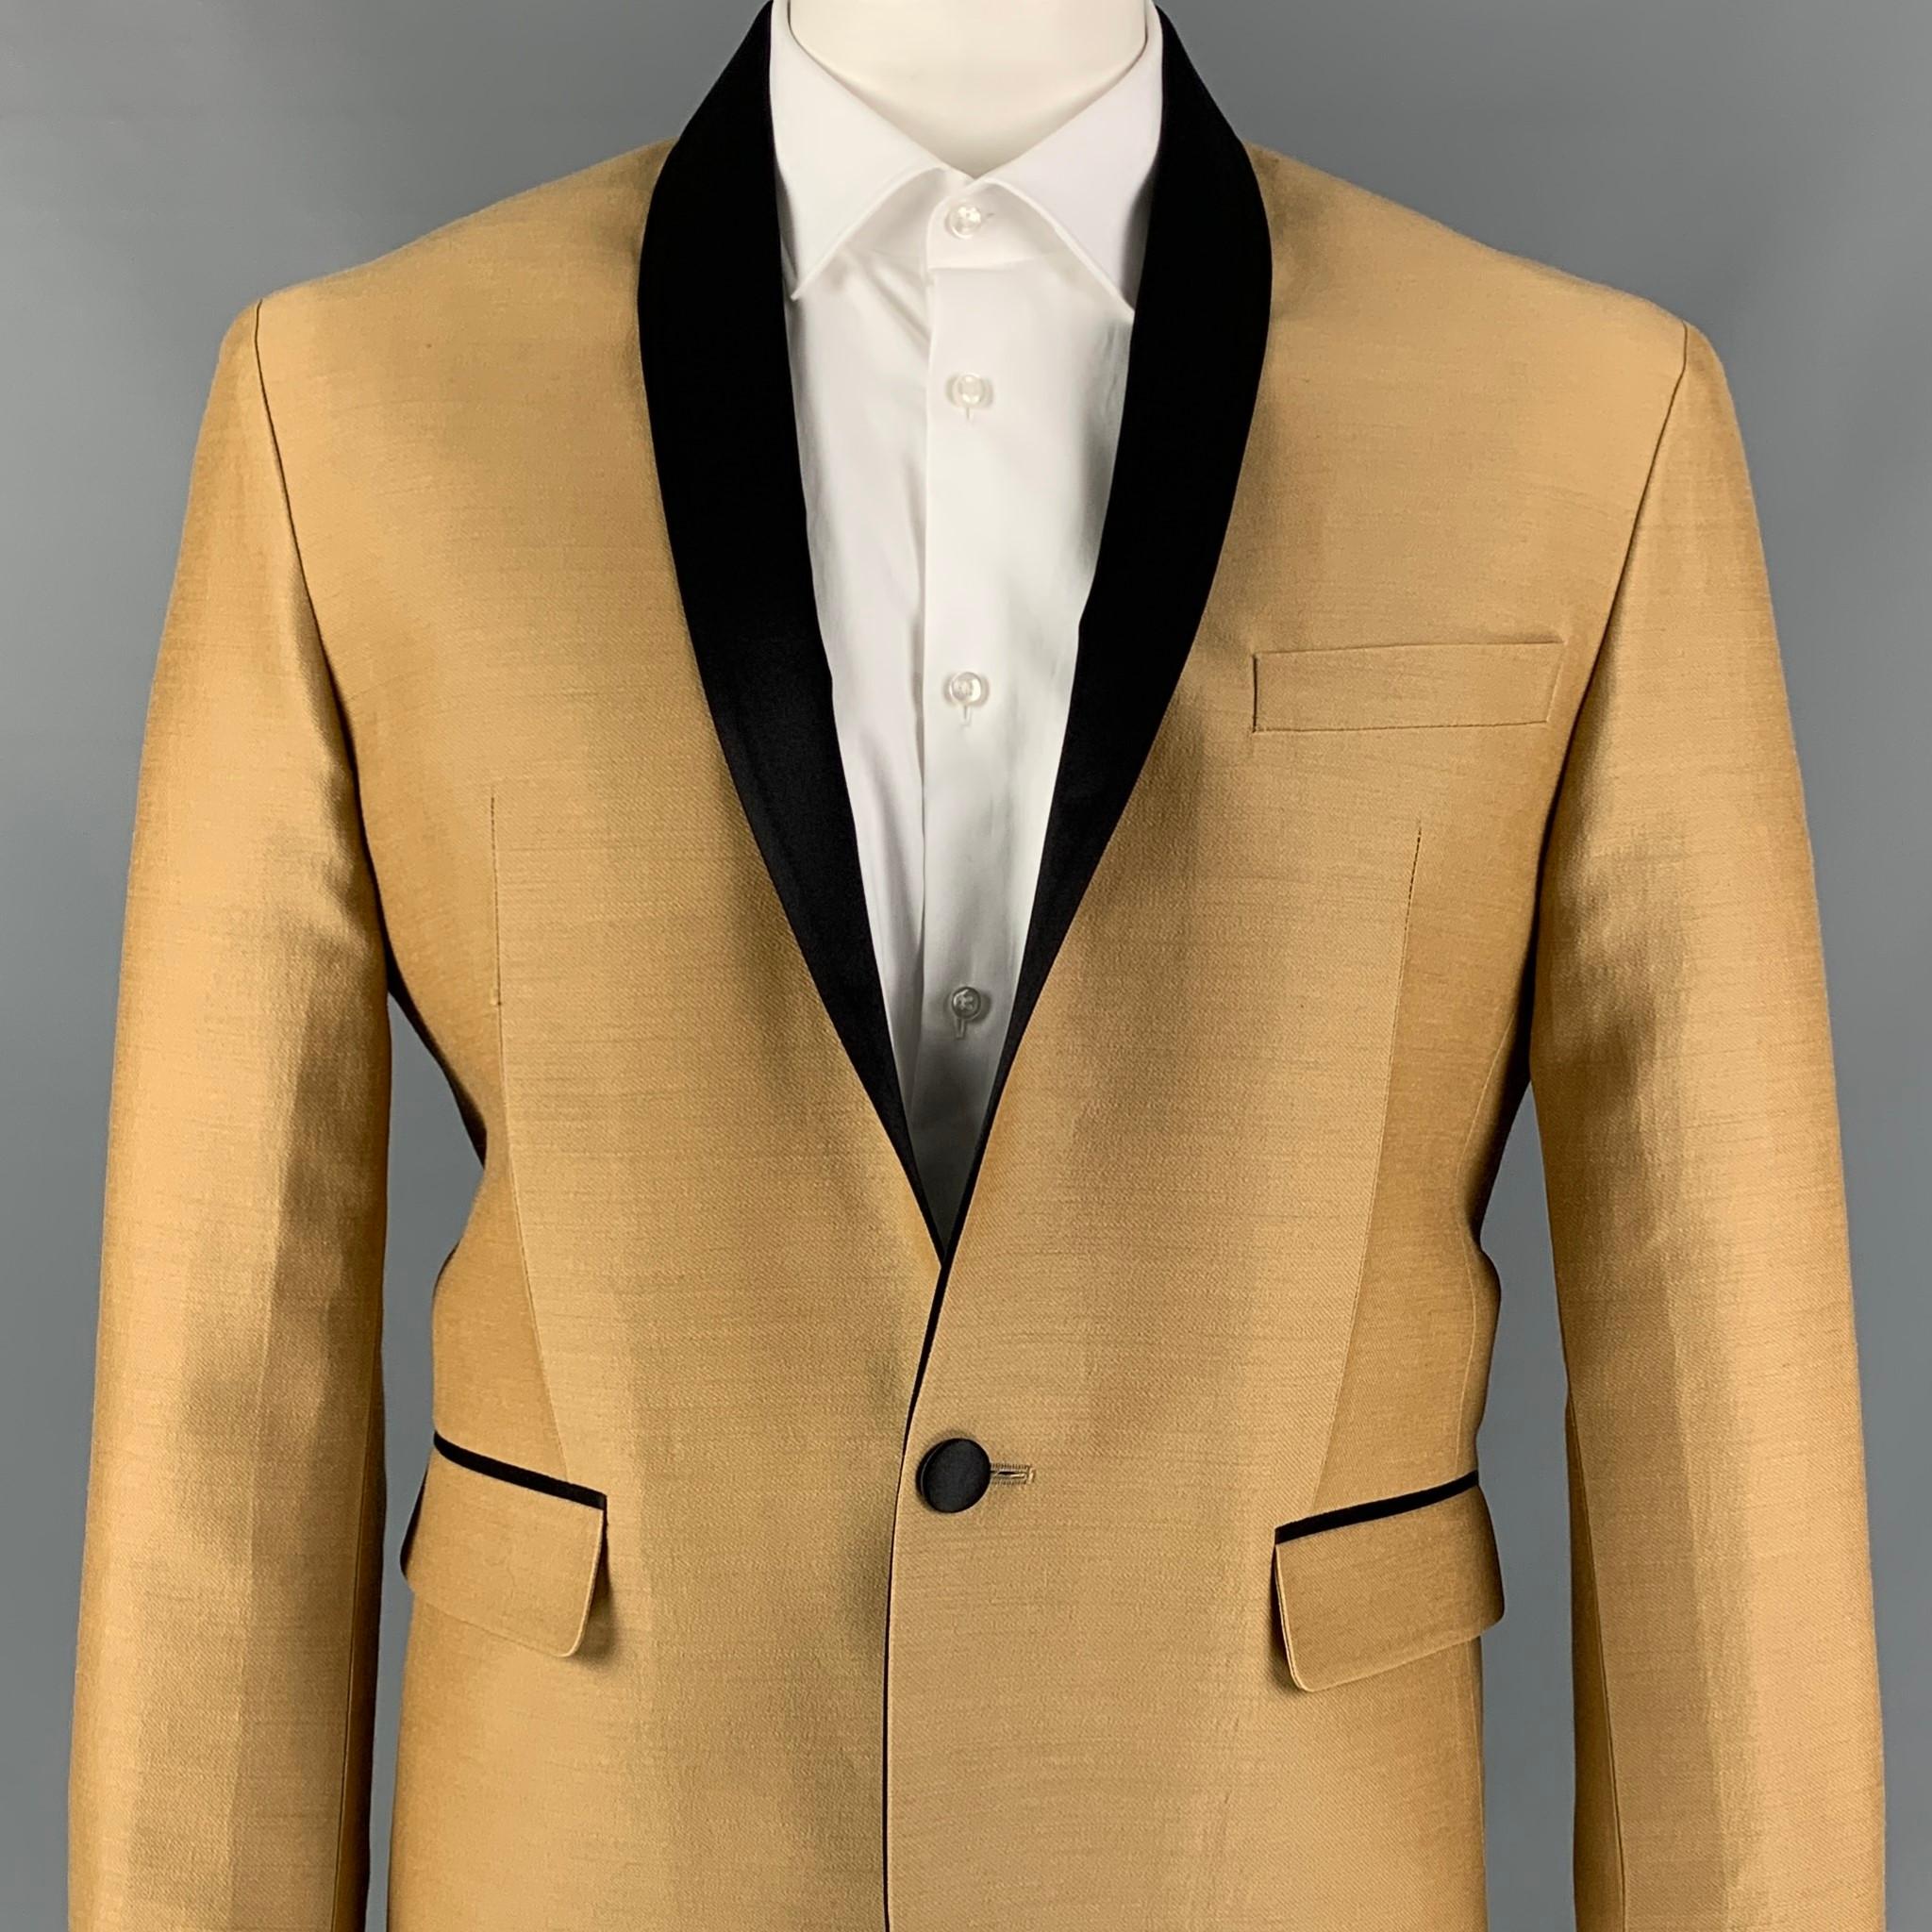 DSQUARED2 sport coat comes in a tan & black wool / silk with a half liner featuring a shawl collar, flap pockets, single back vent, and a single button closure. Made in Italy. 

Very Good Pre-Owned Condition.
Marked: 56

Measurements:

Shoulder: 19